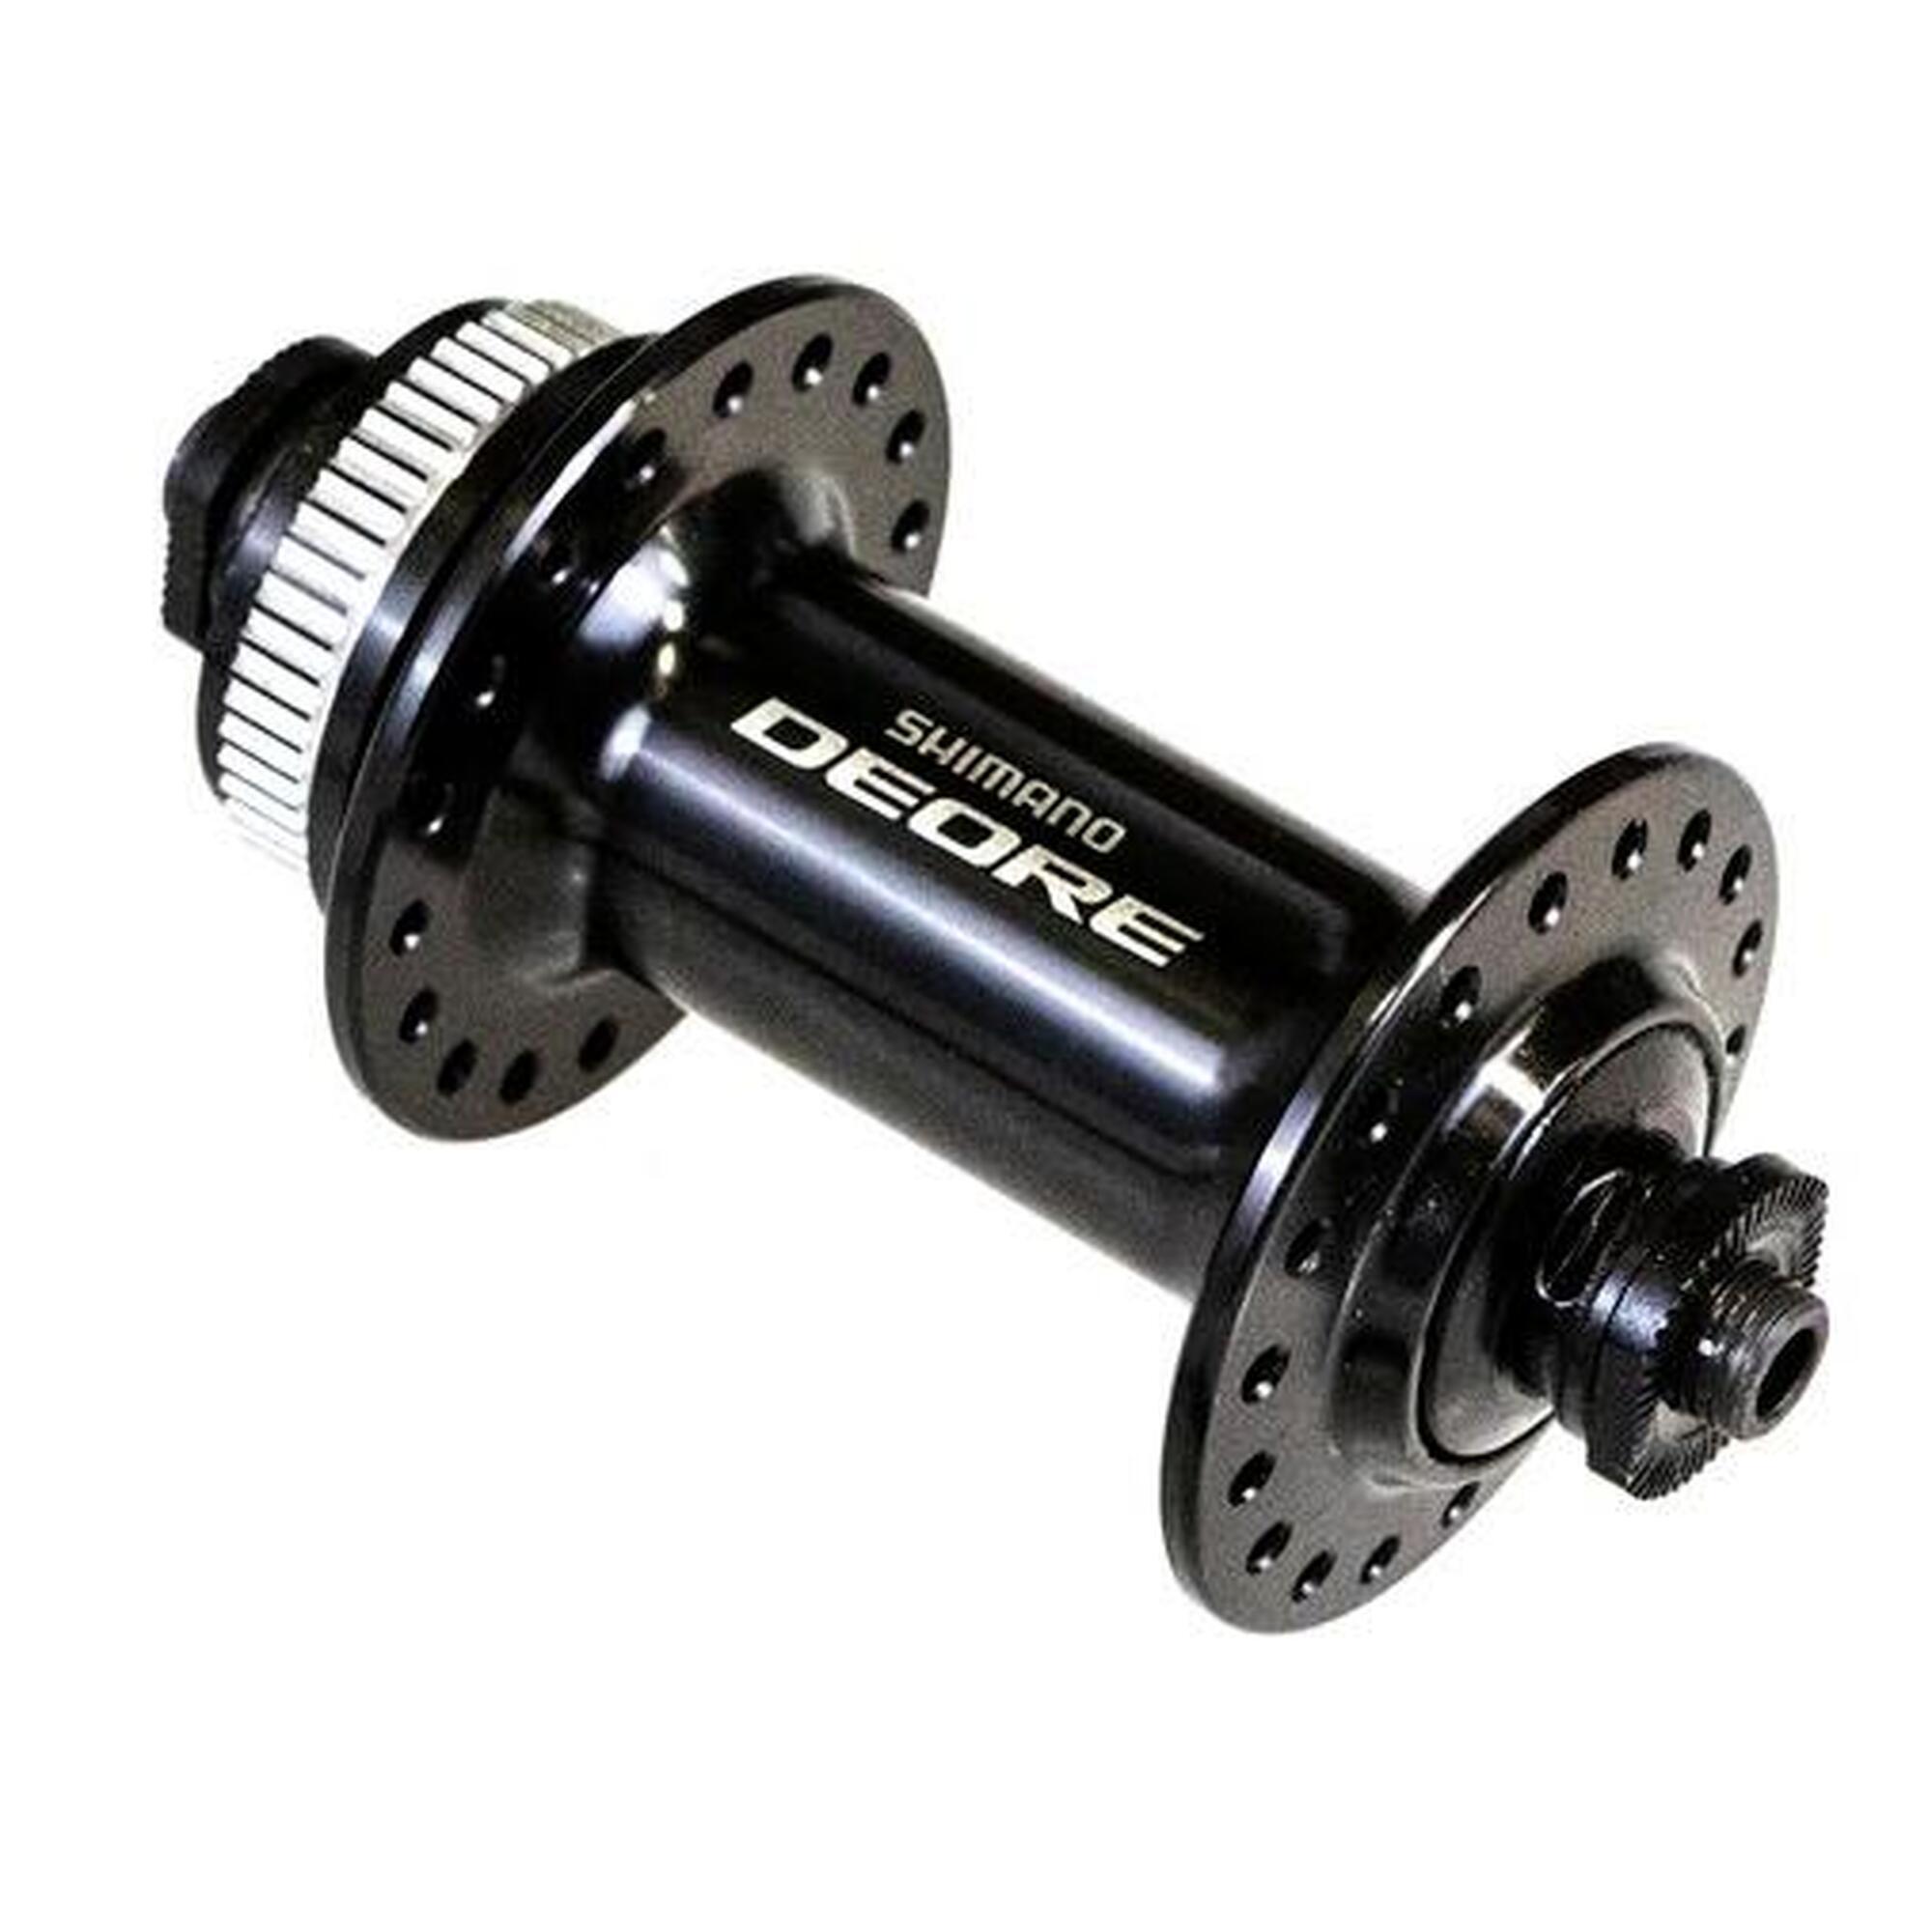 Shimano Deore Foronet Disc Centerlock 36G PURTAGES NOIRS